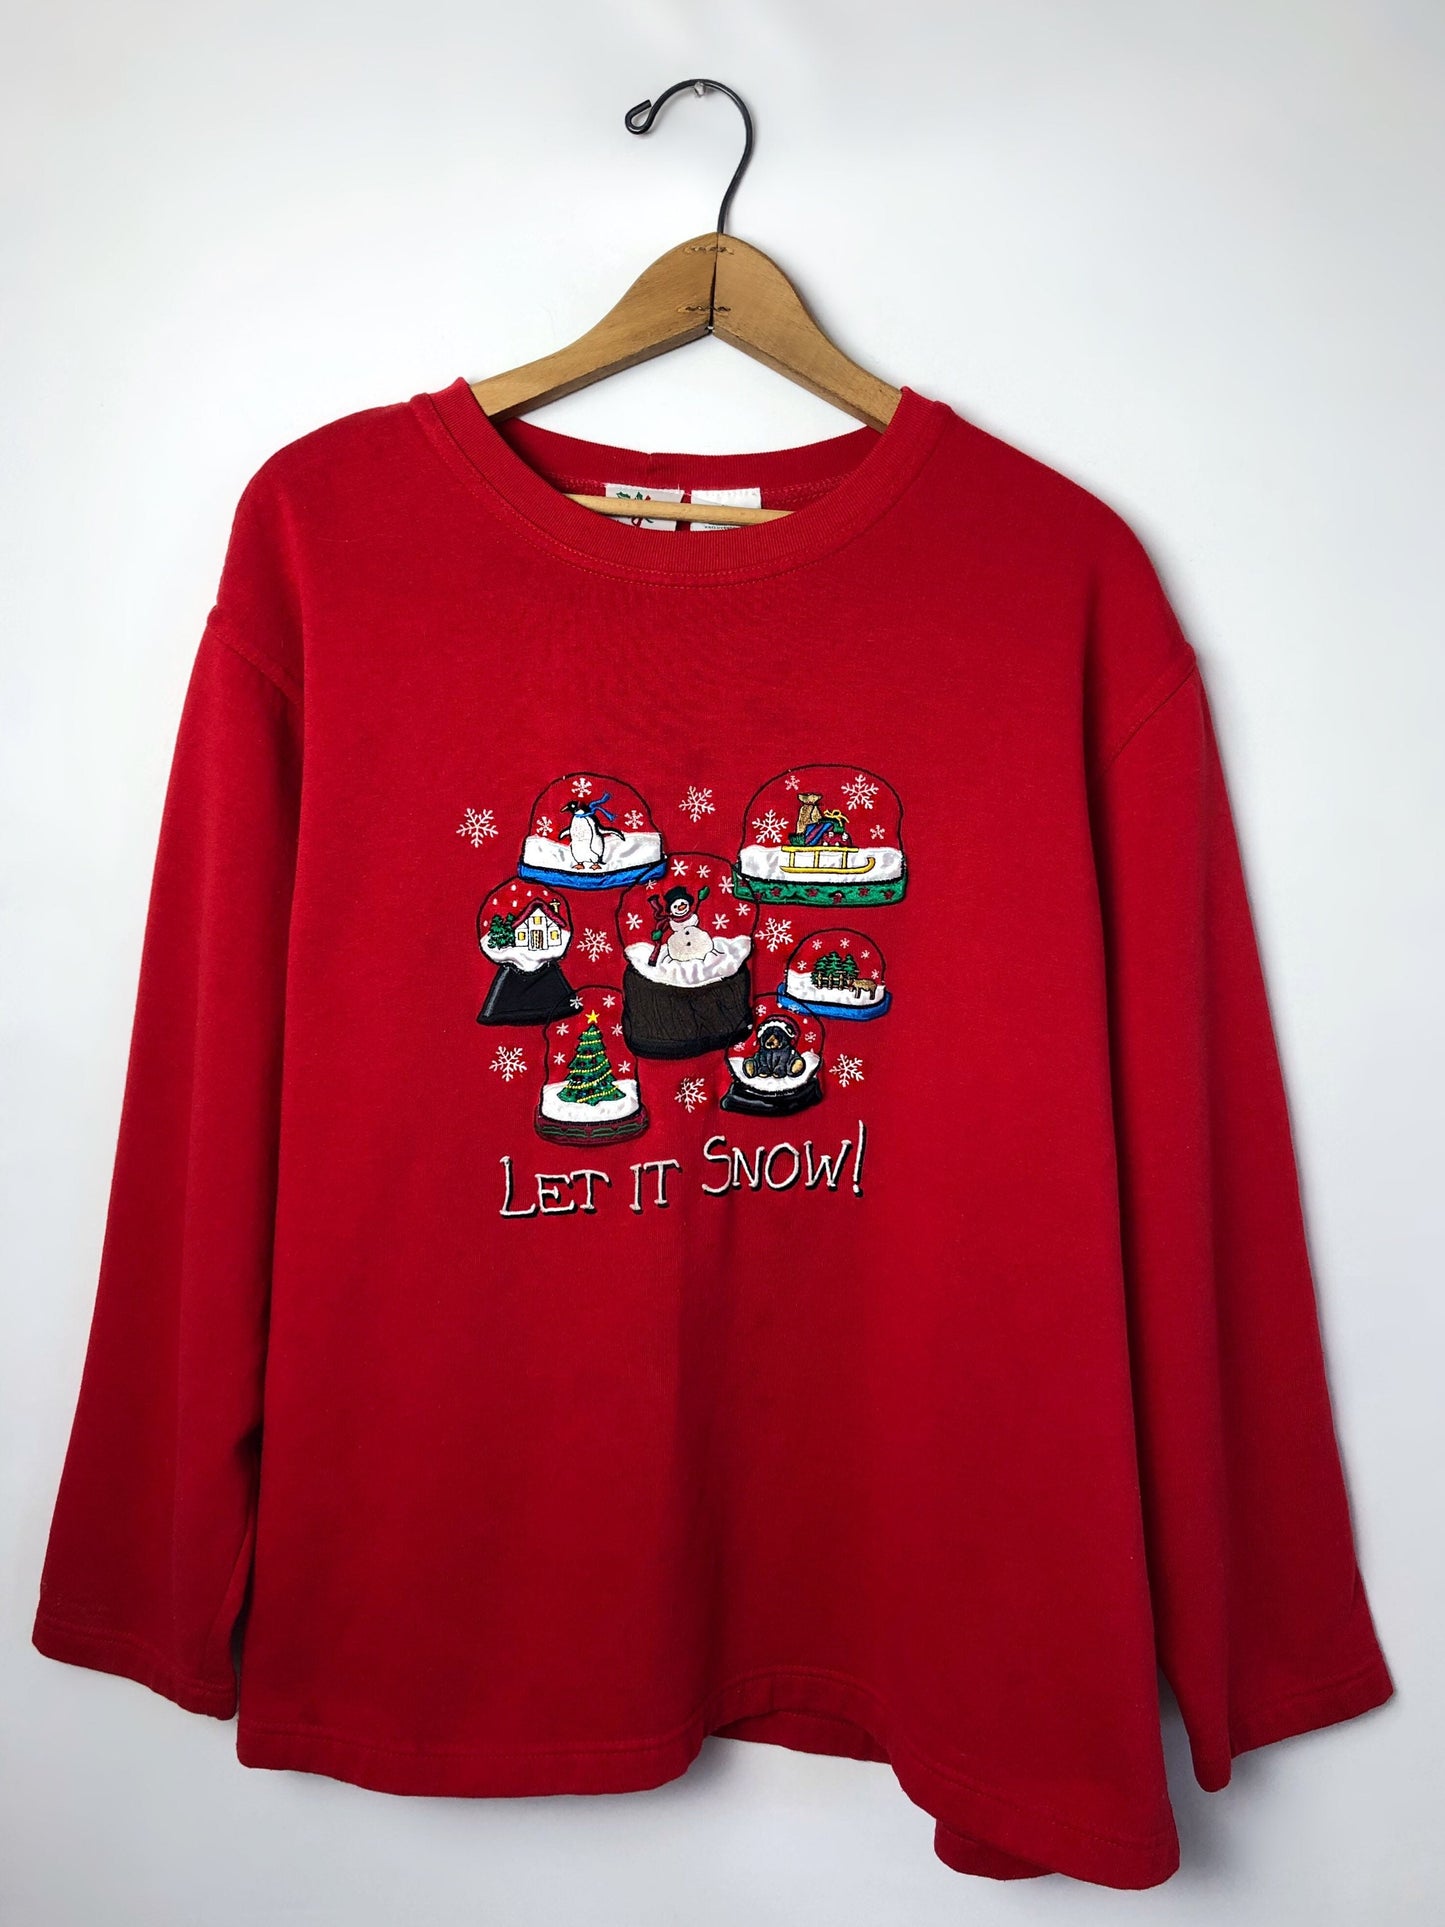 Vintage 90’s Snow Globe Let it SNOW Embroidered Ugly Holiday Sweatshirt Plus Size 2X